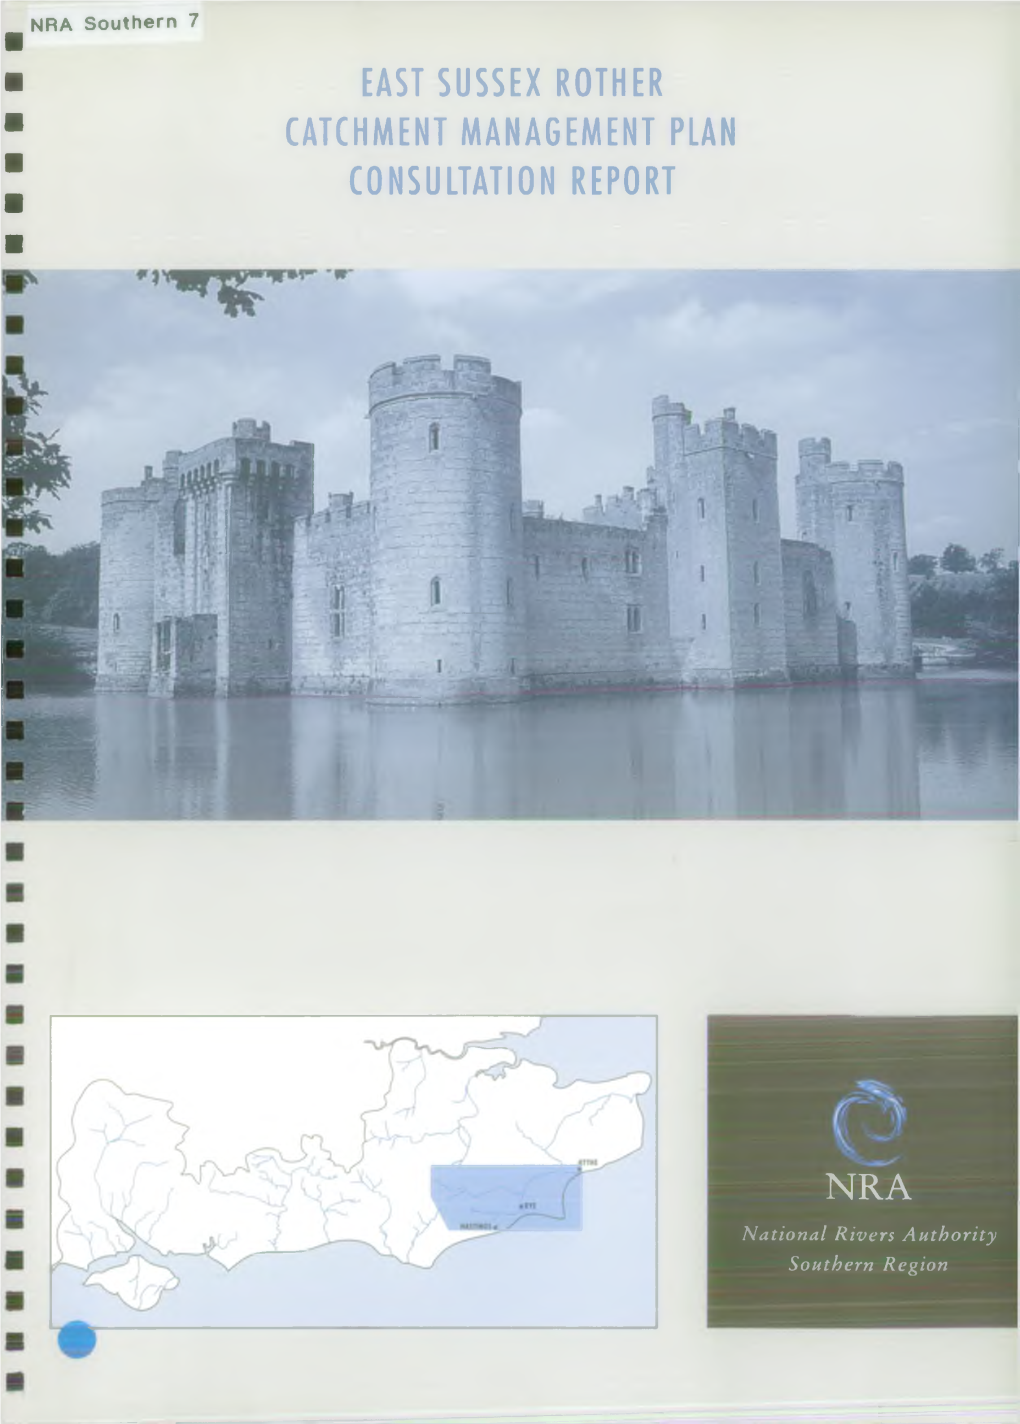 East Sussex Rother Catchment Management Plan Consultation Report